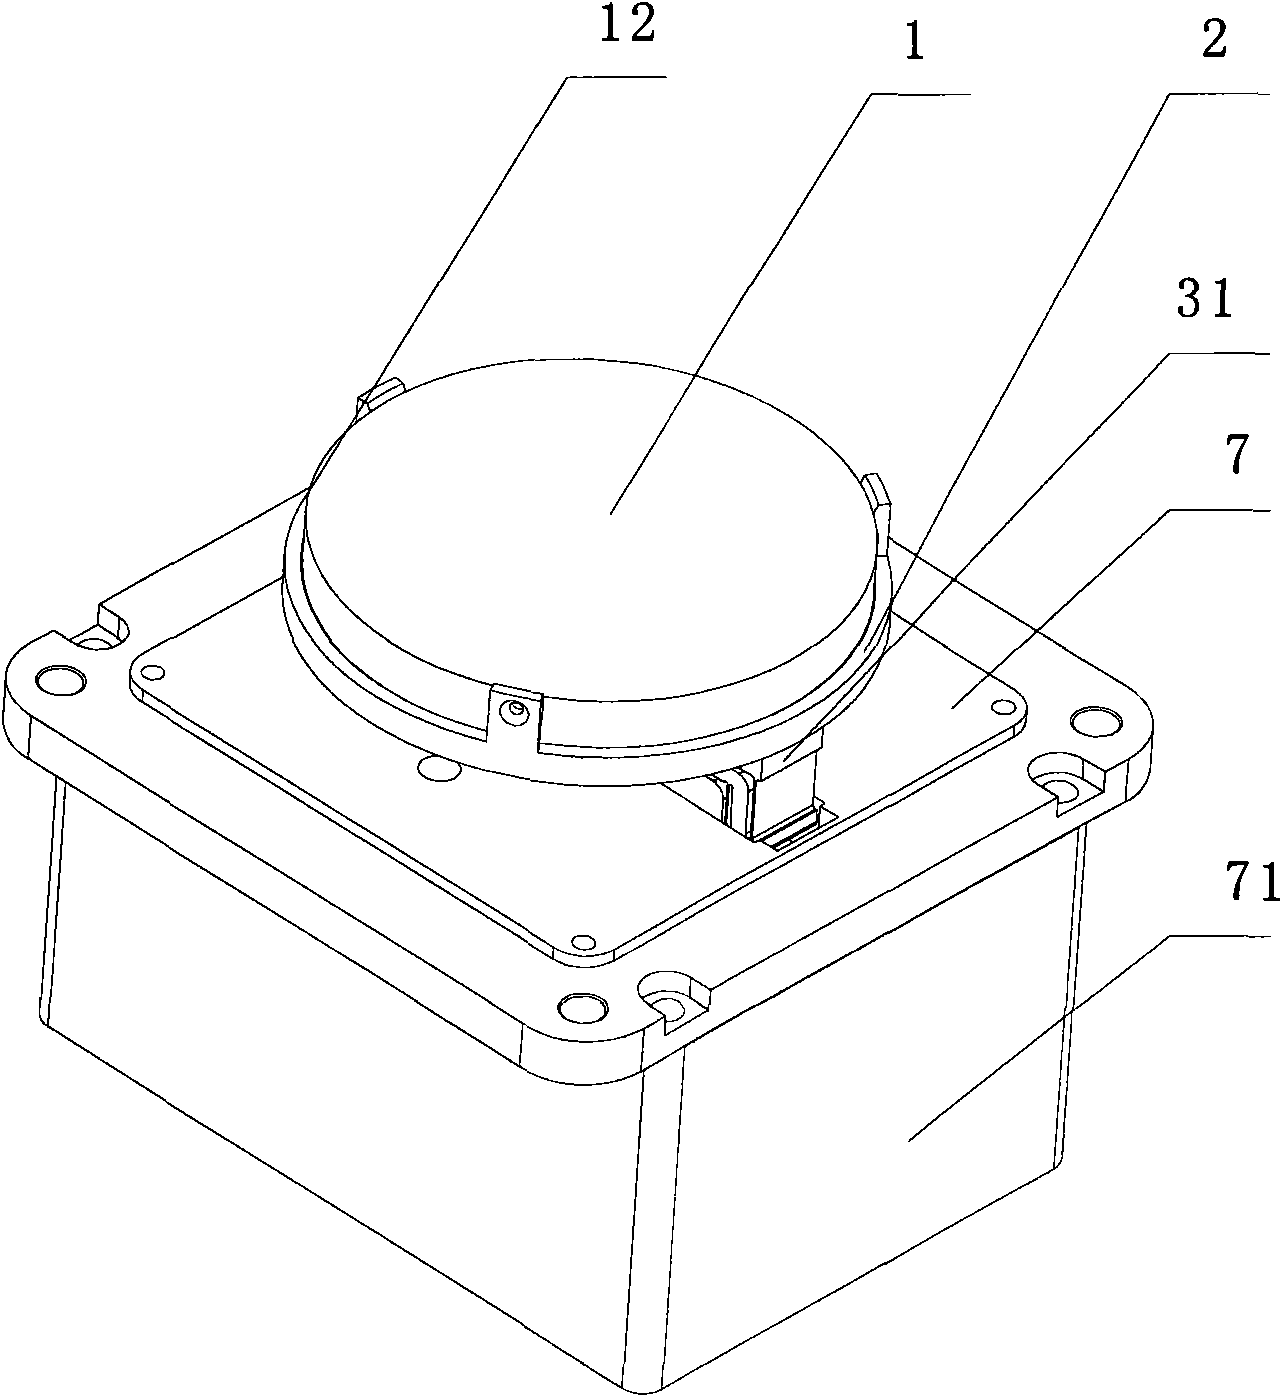 Light beam precision pointing device based on resolution multiplied compliant mechanism